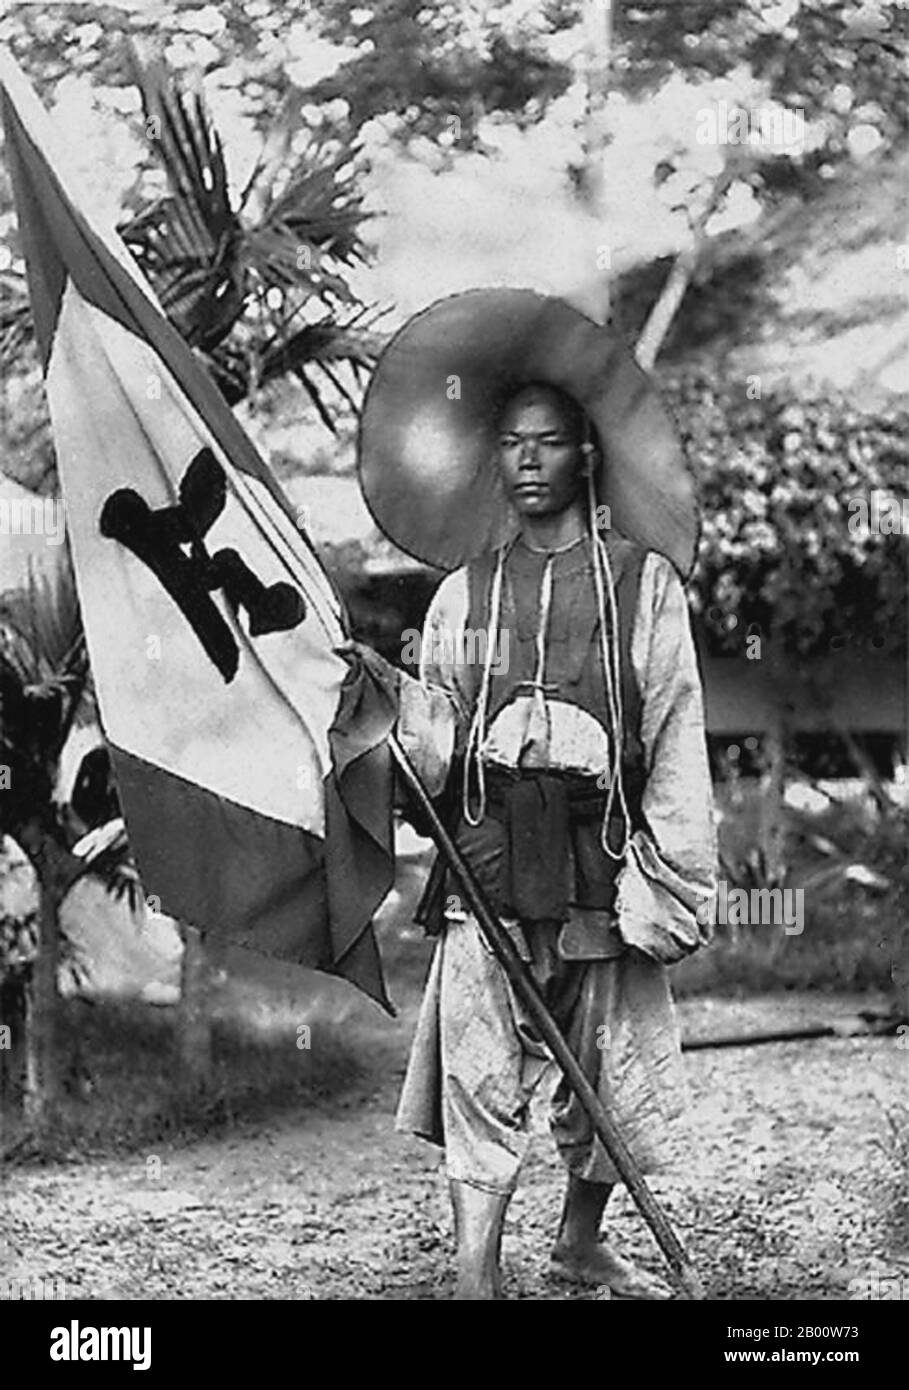 Vietnam: A Black Flag soldier with the Black Flag banner, Tonkin. Photo by Charles-Edouard Hocquard (1853-1911), 1885.  The Black Flag Army (Chinese: Heiqi Jun) was a remnant of a bandit group who may have been former Taiping rebels that crossed the border from Guangxi province of China into Upper Tonkin, in the Empire of Annam (Vietnam) in 1865. They became known mainly for their fights against French forces in cooperation with both Vietnamese and Chinese authorities. The Black Flag Army is so named because of the preference of its commander, Liu Yongfu, for using black command flags. Stock Photo